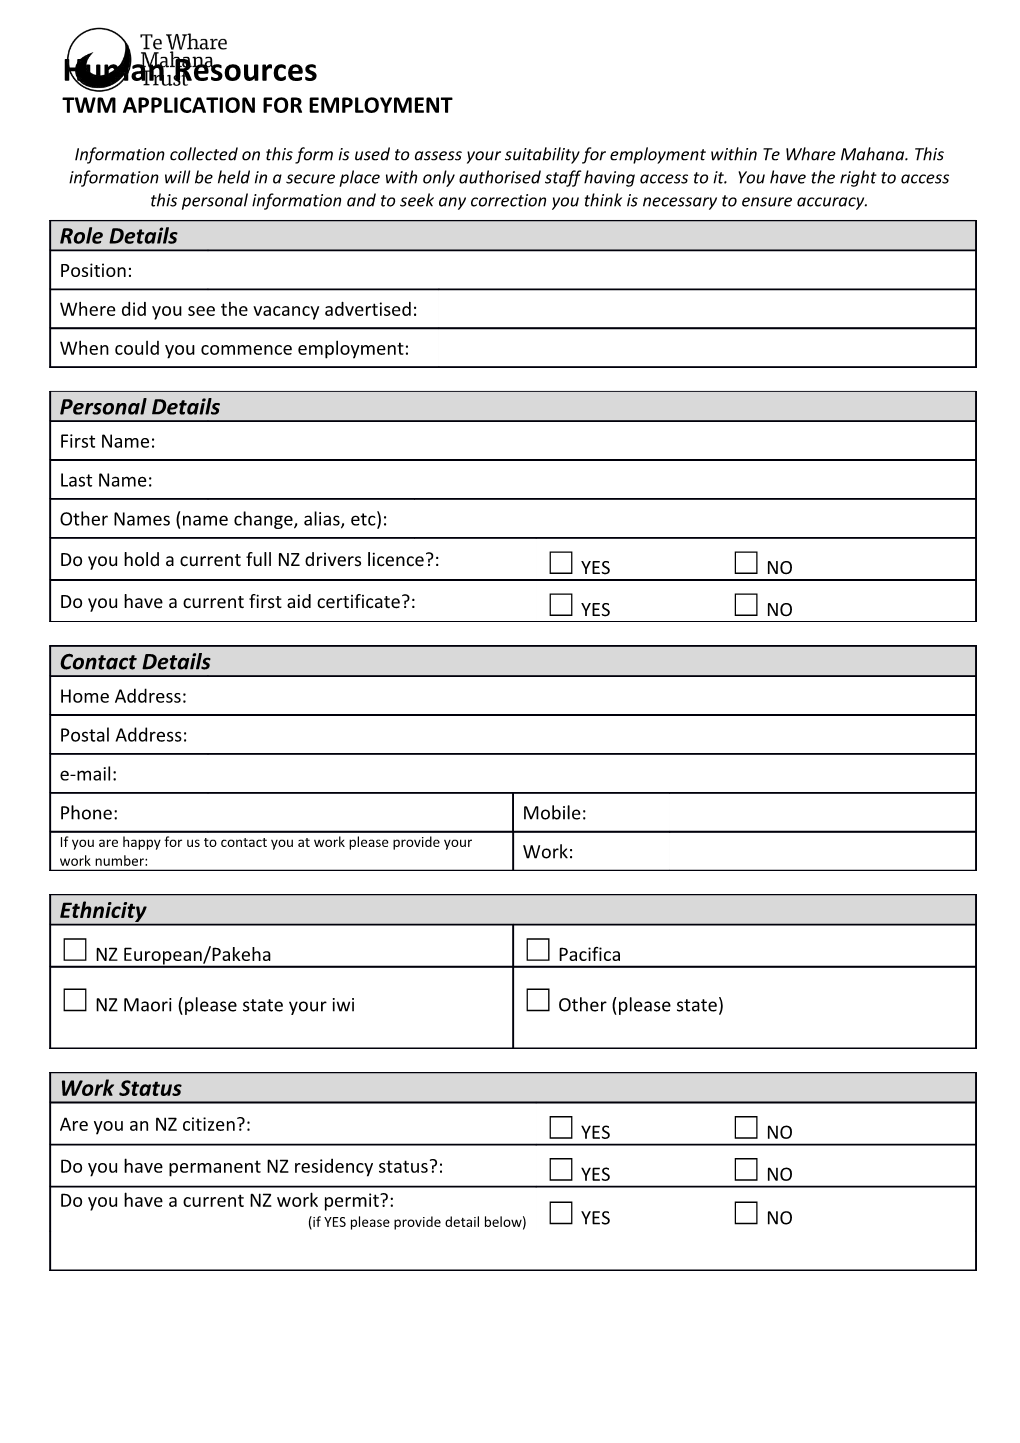 Information Collected on This Form Is Used to Assess Your Suitability for Employment Within